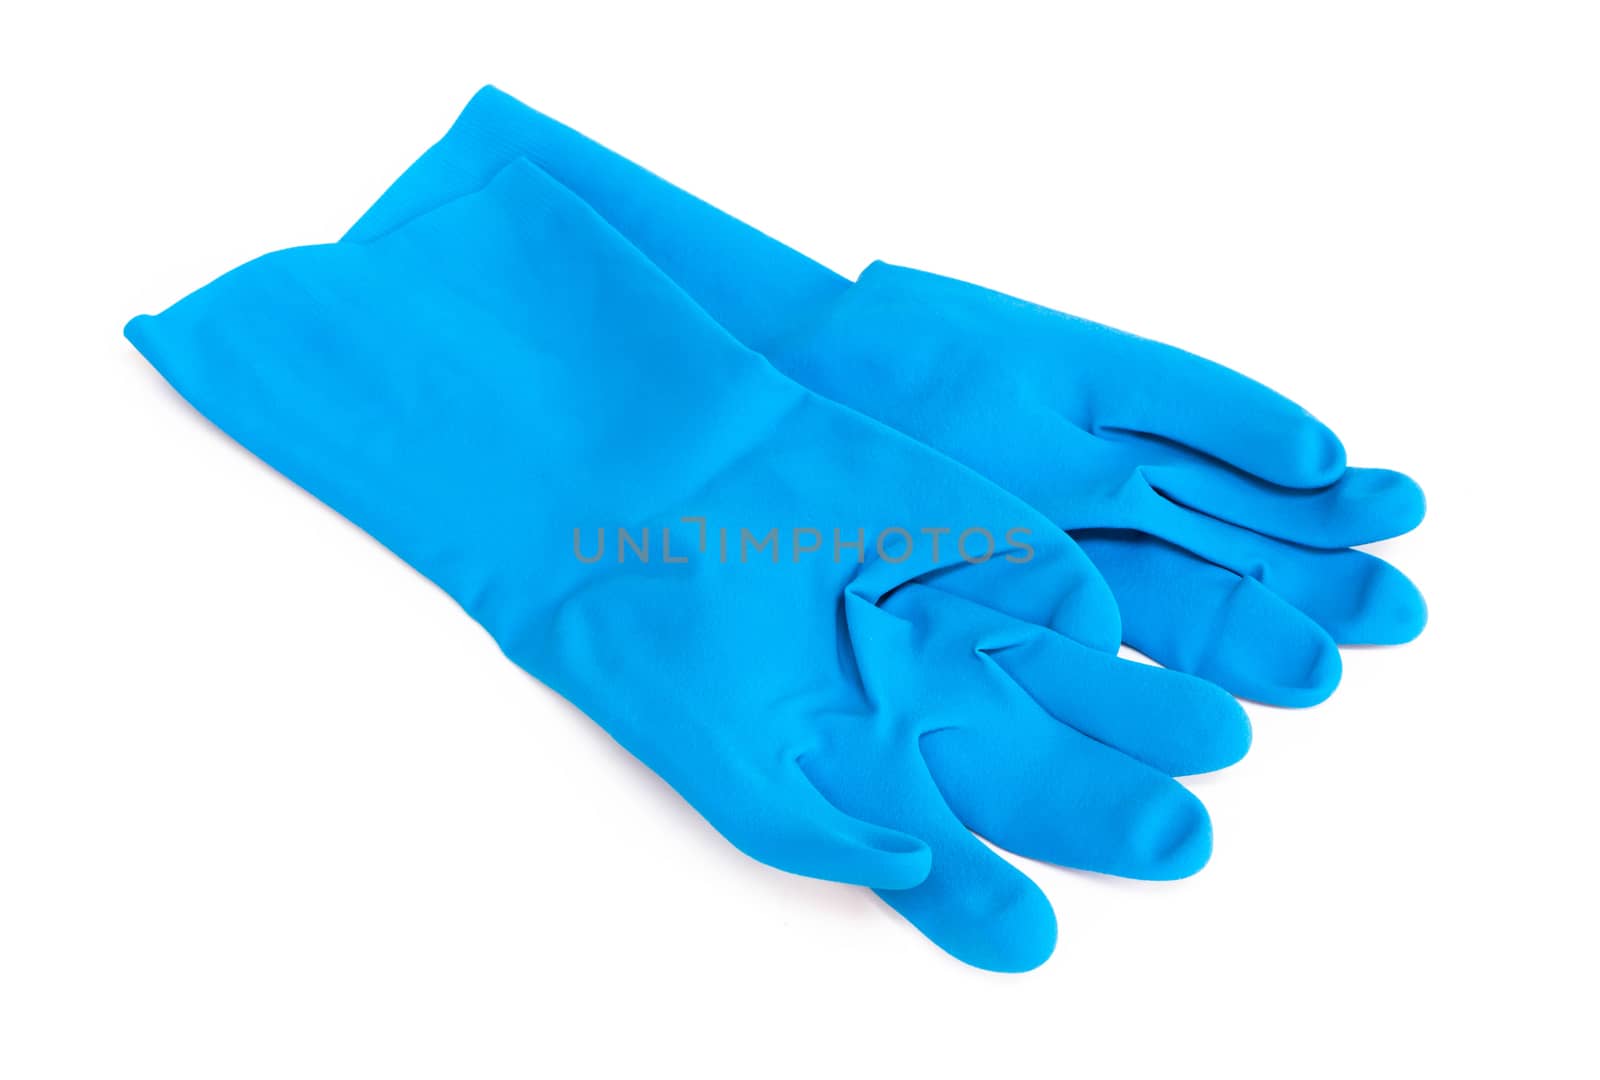 blue rubber gloves for cleaning on white background, workhouse c by pt.pongsak@gmail.com